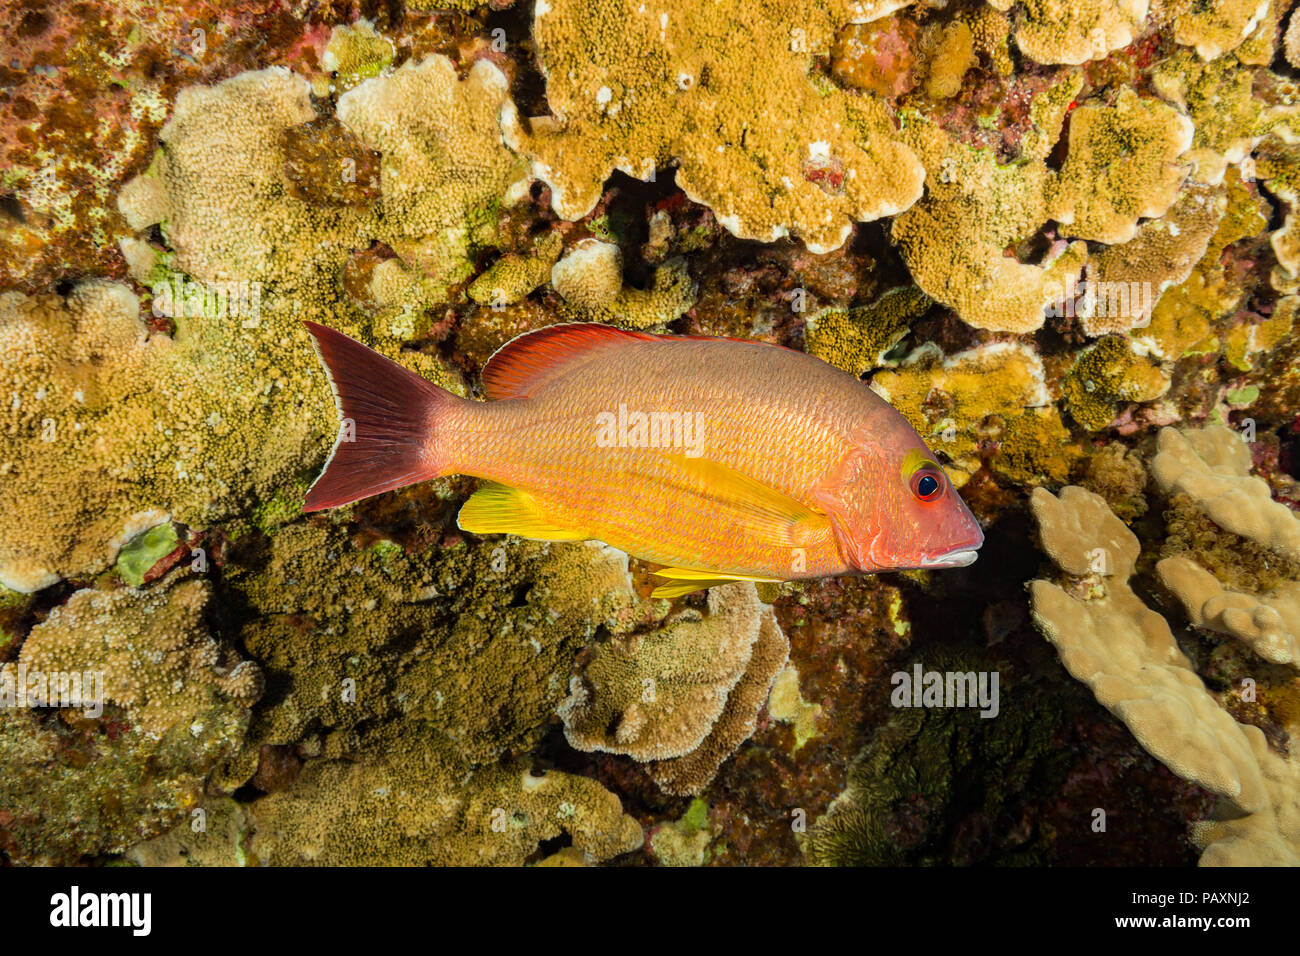 The blacktail snapper, Lutjanus fulvus, reach 13 inches in length and feed mostly on small fish and crabs.  Hawaii. Stock Photo